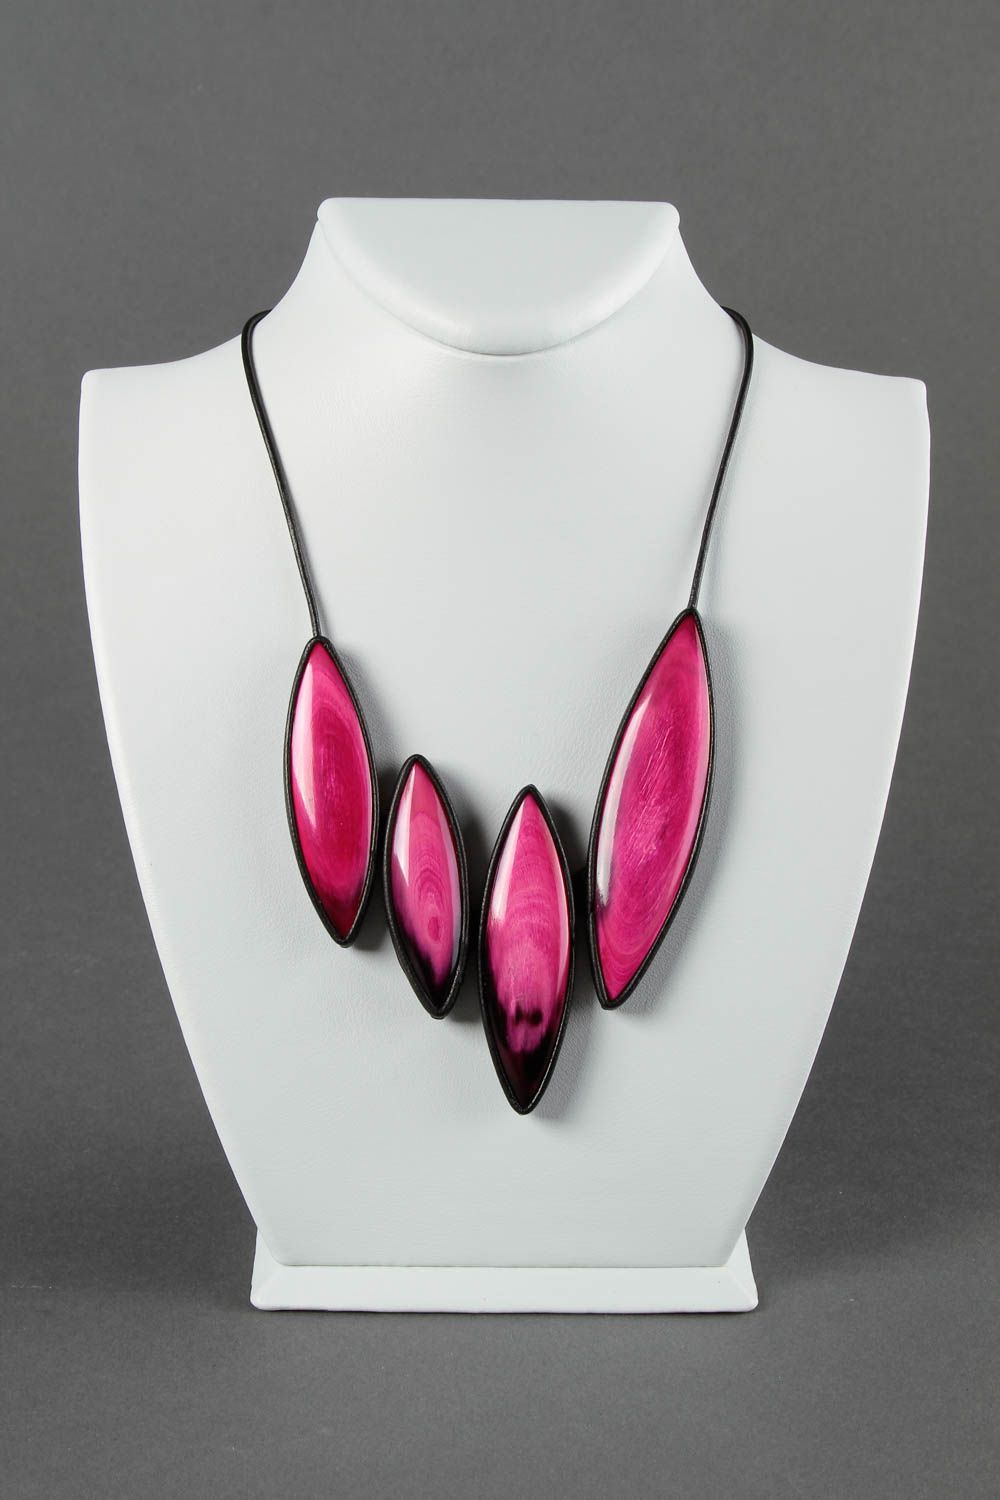 Leather necklace handmade gift jewelry made of horn pink design necklace  photo 1